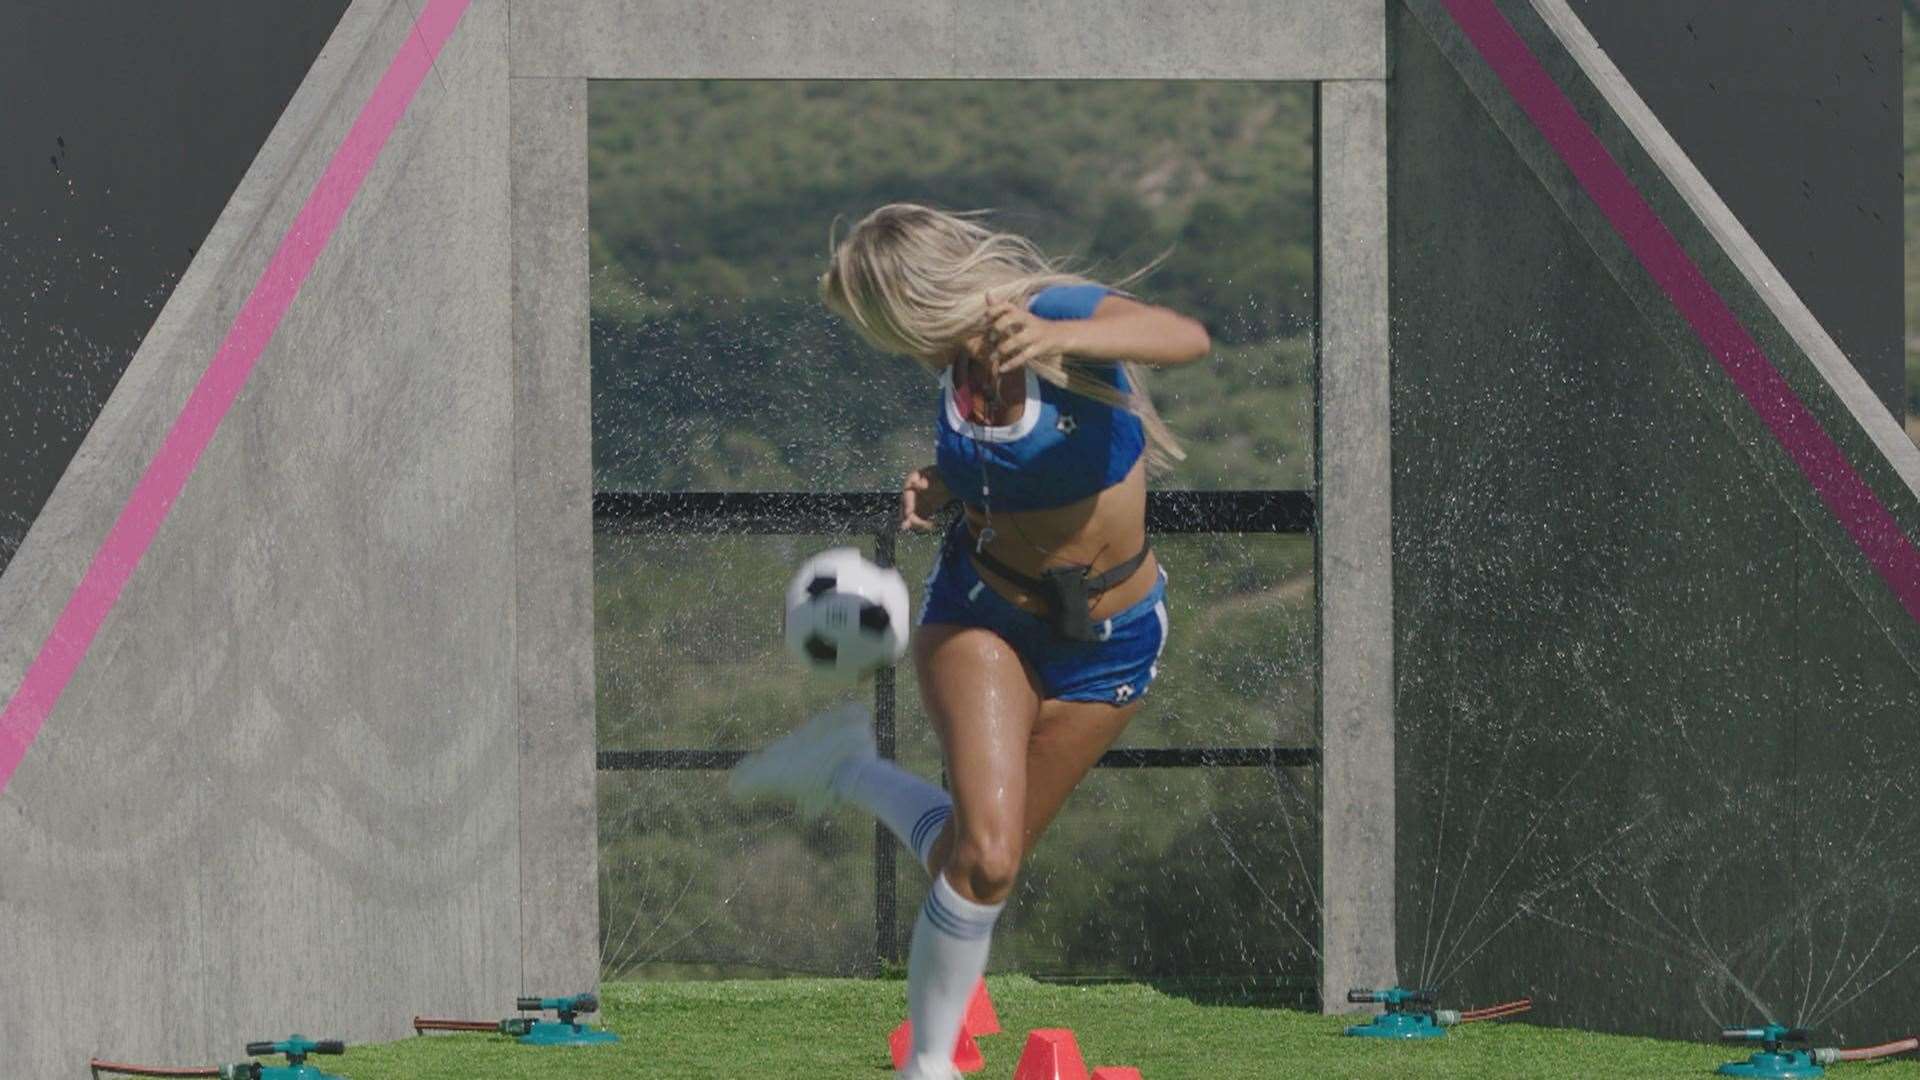 Jess doing a ‘rainbow flick’ trick during the football challenge. Picture: ITV